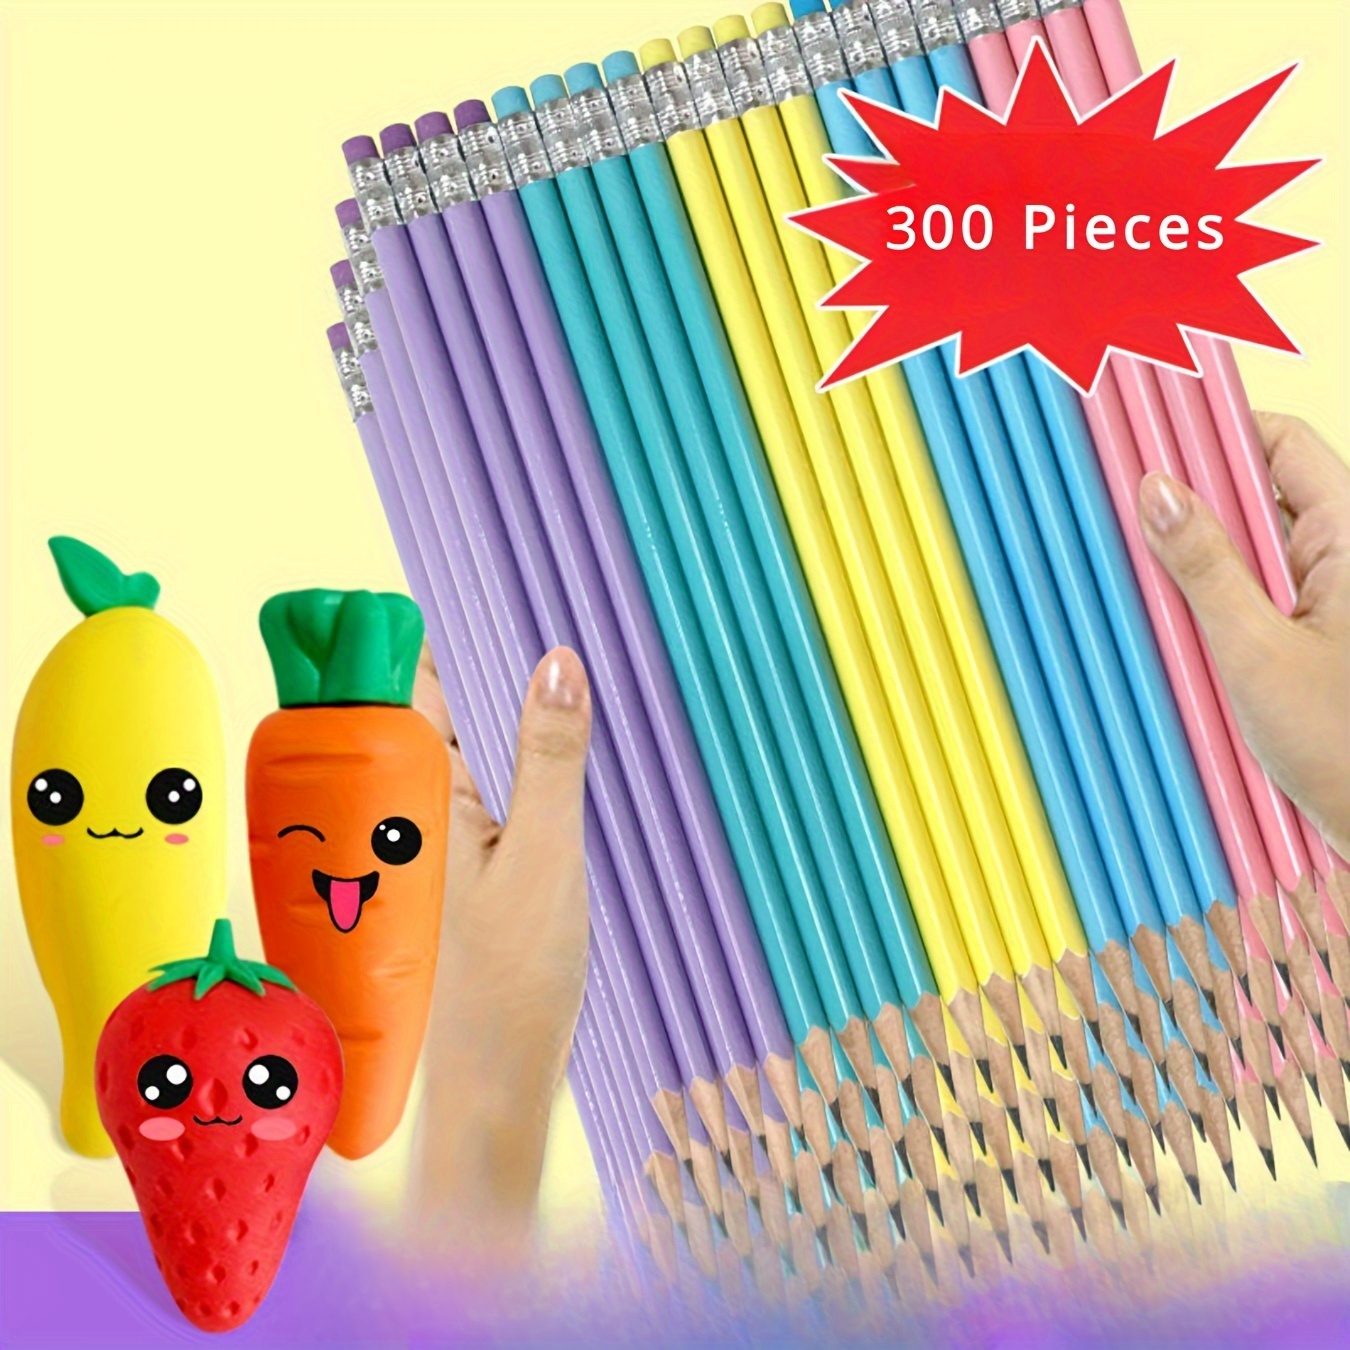  300 Pieces Valentine's Day Pencils for Kids Assortment  Cylinder Wood Pencils Bulk Valentine Pencils with Erasers Cute Pencils Bulk  for Kids Valentine's Day Party Office School Supplies(Valentine') : Office  Products